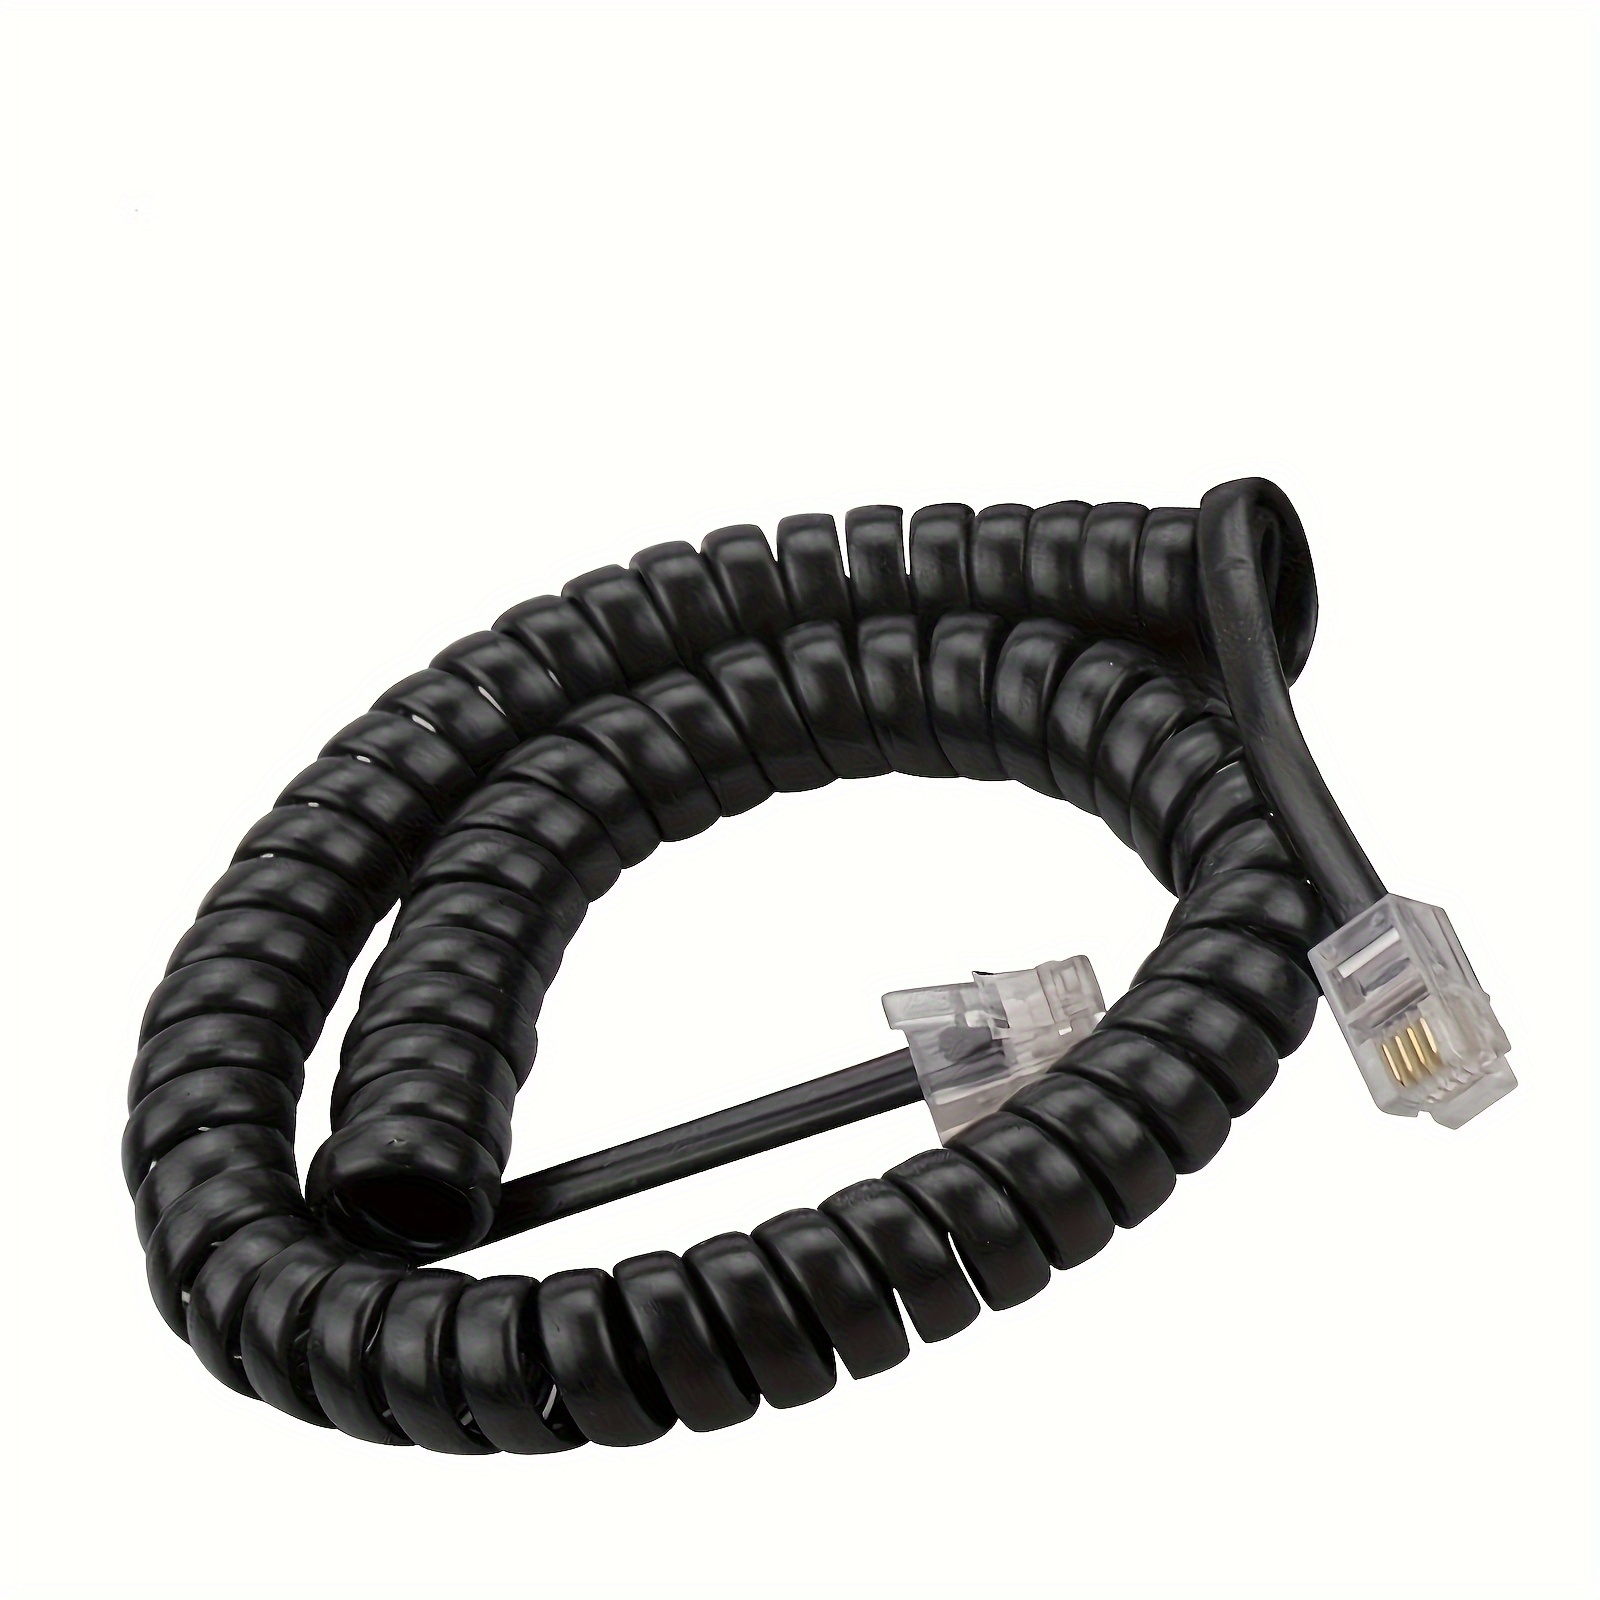 25FT Telephone Extension Cord Cable, Landline Phone Line Wire with RJ11  6P4C Plugs, Includes Cable Clips - Black - 2 Pack